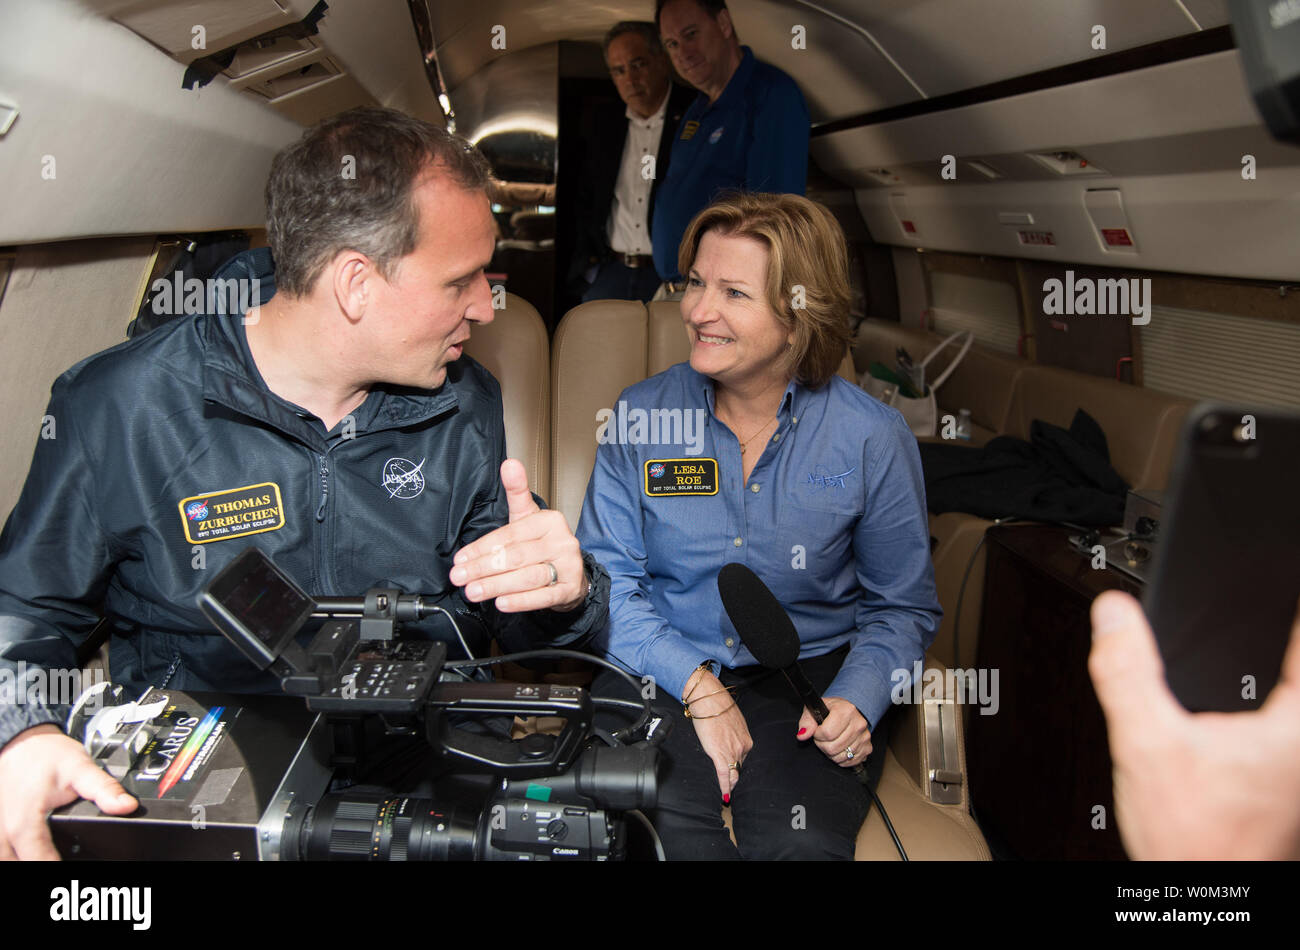 NASA Associate Administrator for the Science Mission Directorate Thomas Zurbuchen explains to acting NASA Administrator Lesa Roe how the spectrograph showing different colors correlate to different elements, such as helium, in the Sun's atmosphere during the solar eclipse on August 21, 2017, from onboard a NASA Armstrong Flight Research CenterÕs Gulfstream III 35,000 feet above the Oregon Coast. A total solar eclipse swept across a narrow portion of the contiguous United States from Lincoln Beach, Oregon to Charleston, South Carolina. NASA Photo by Carla Thomas/UPI Stock Photo